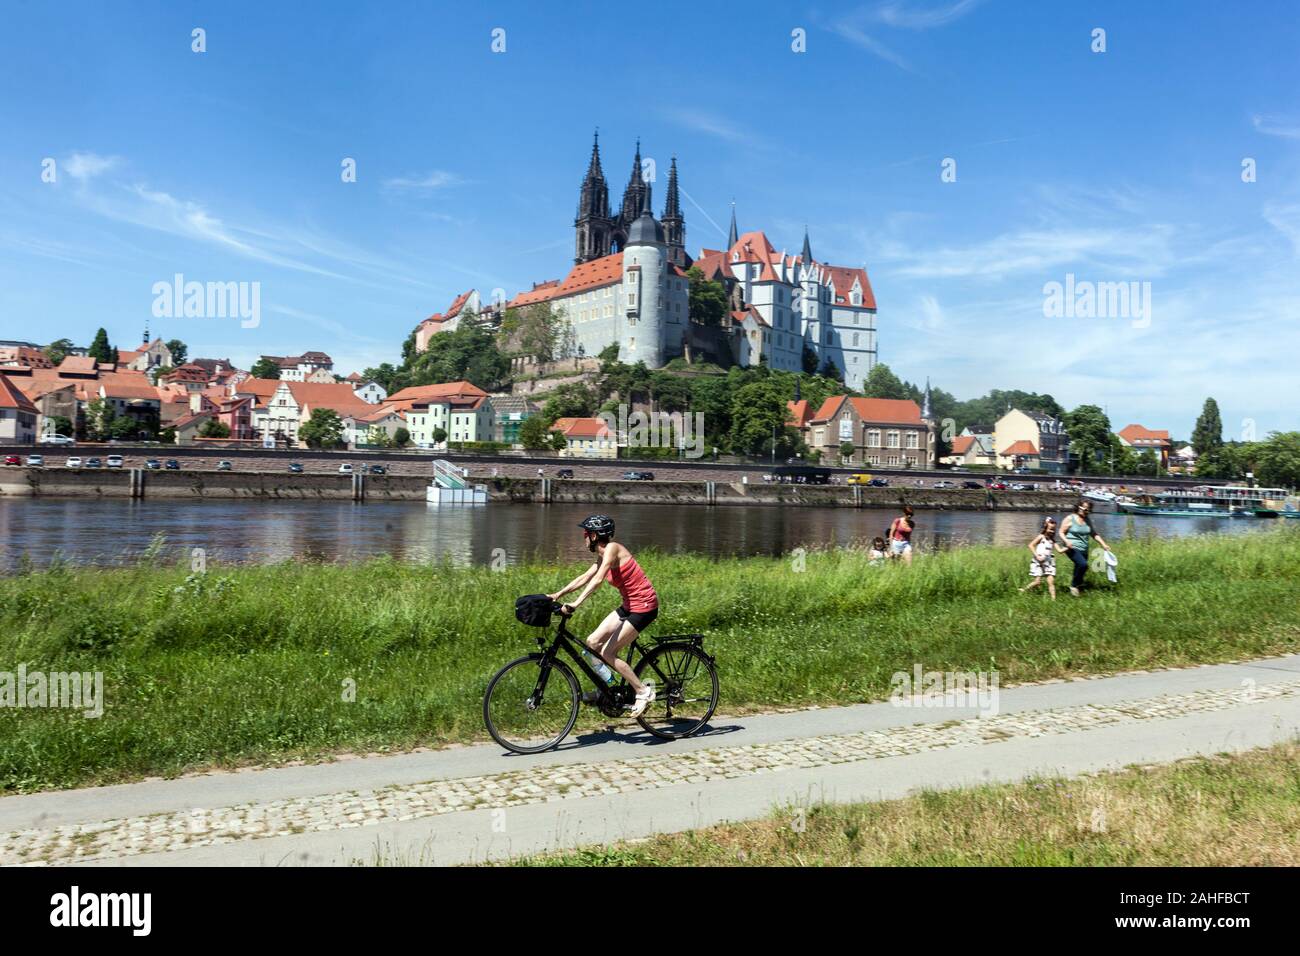 People on a meadow at the Elbe river bike, Teenager riding a bicycle on Germany cycle path Meissen skyline Saxony Germany Elberdweg Riding bike Stock Photo